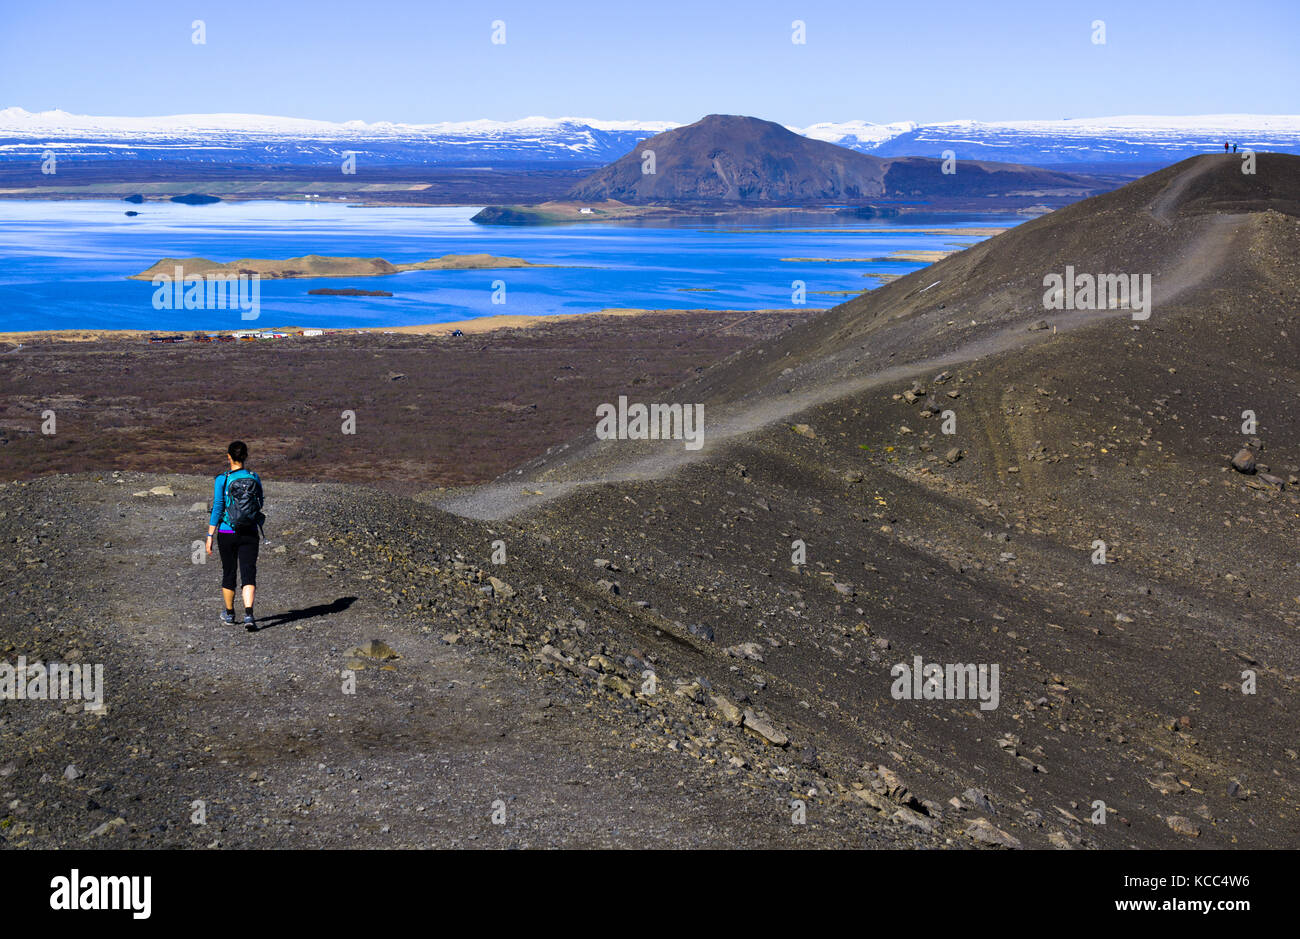 Hikers at Hverfell (also called Hverfjall) tephra cone or tuff ring volcano with Mývatn lake in the background. Iceland. Stock Photo